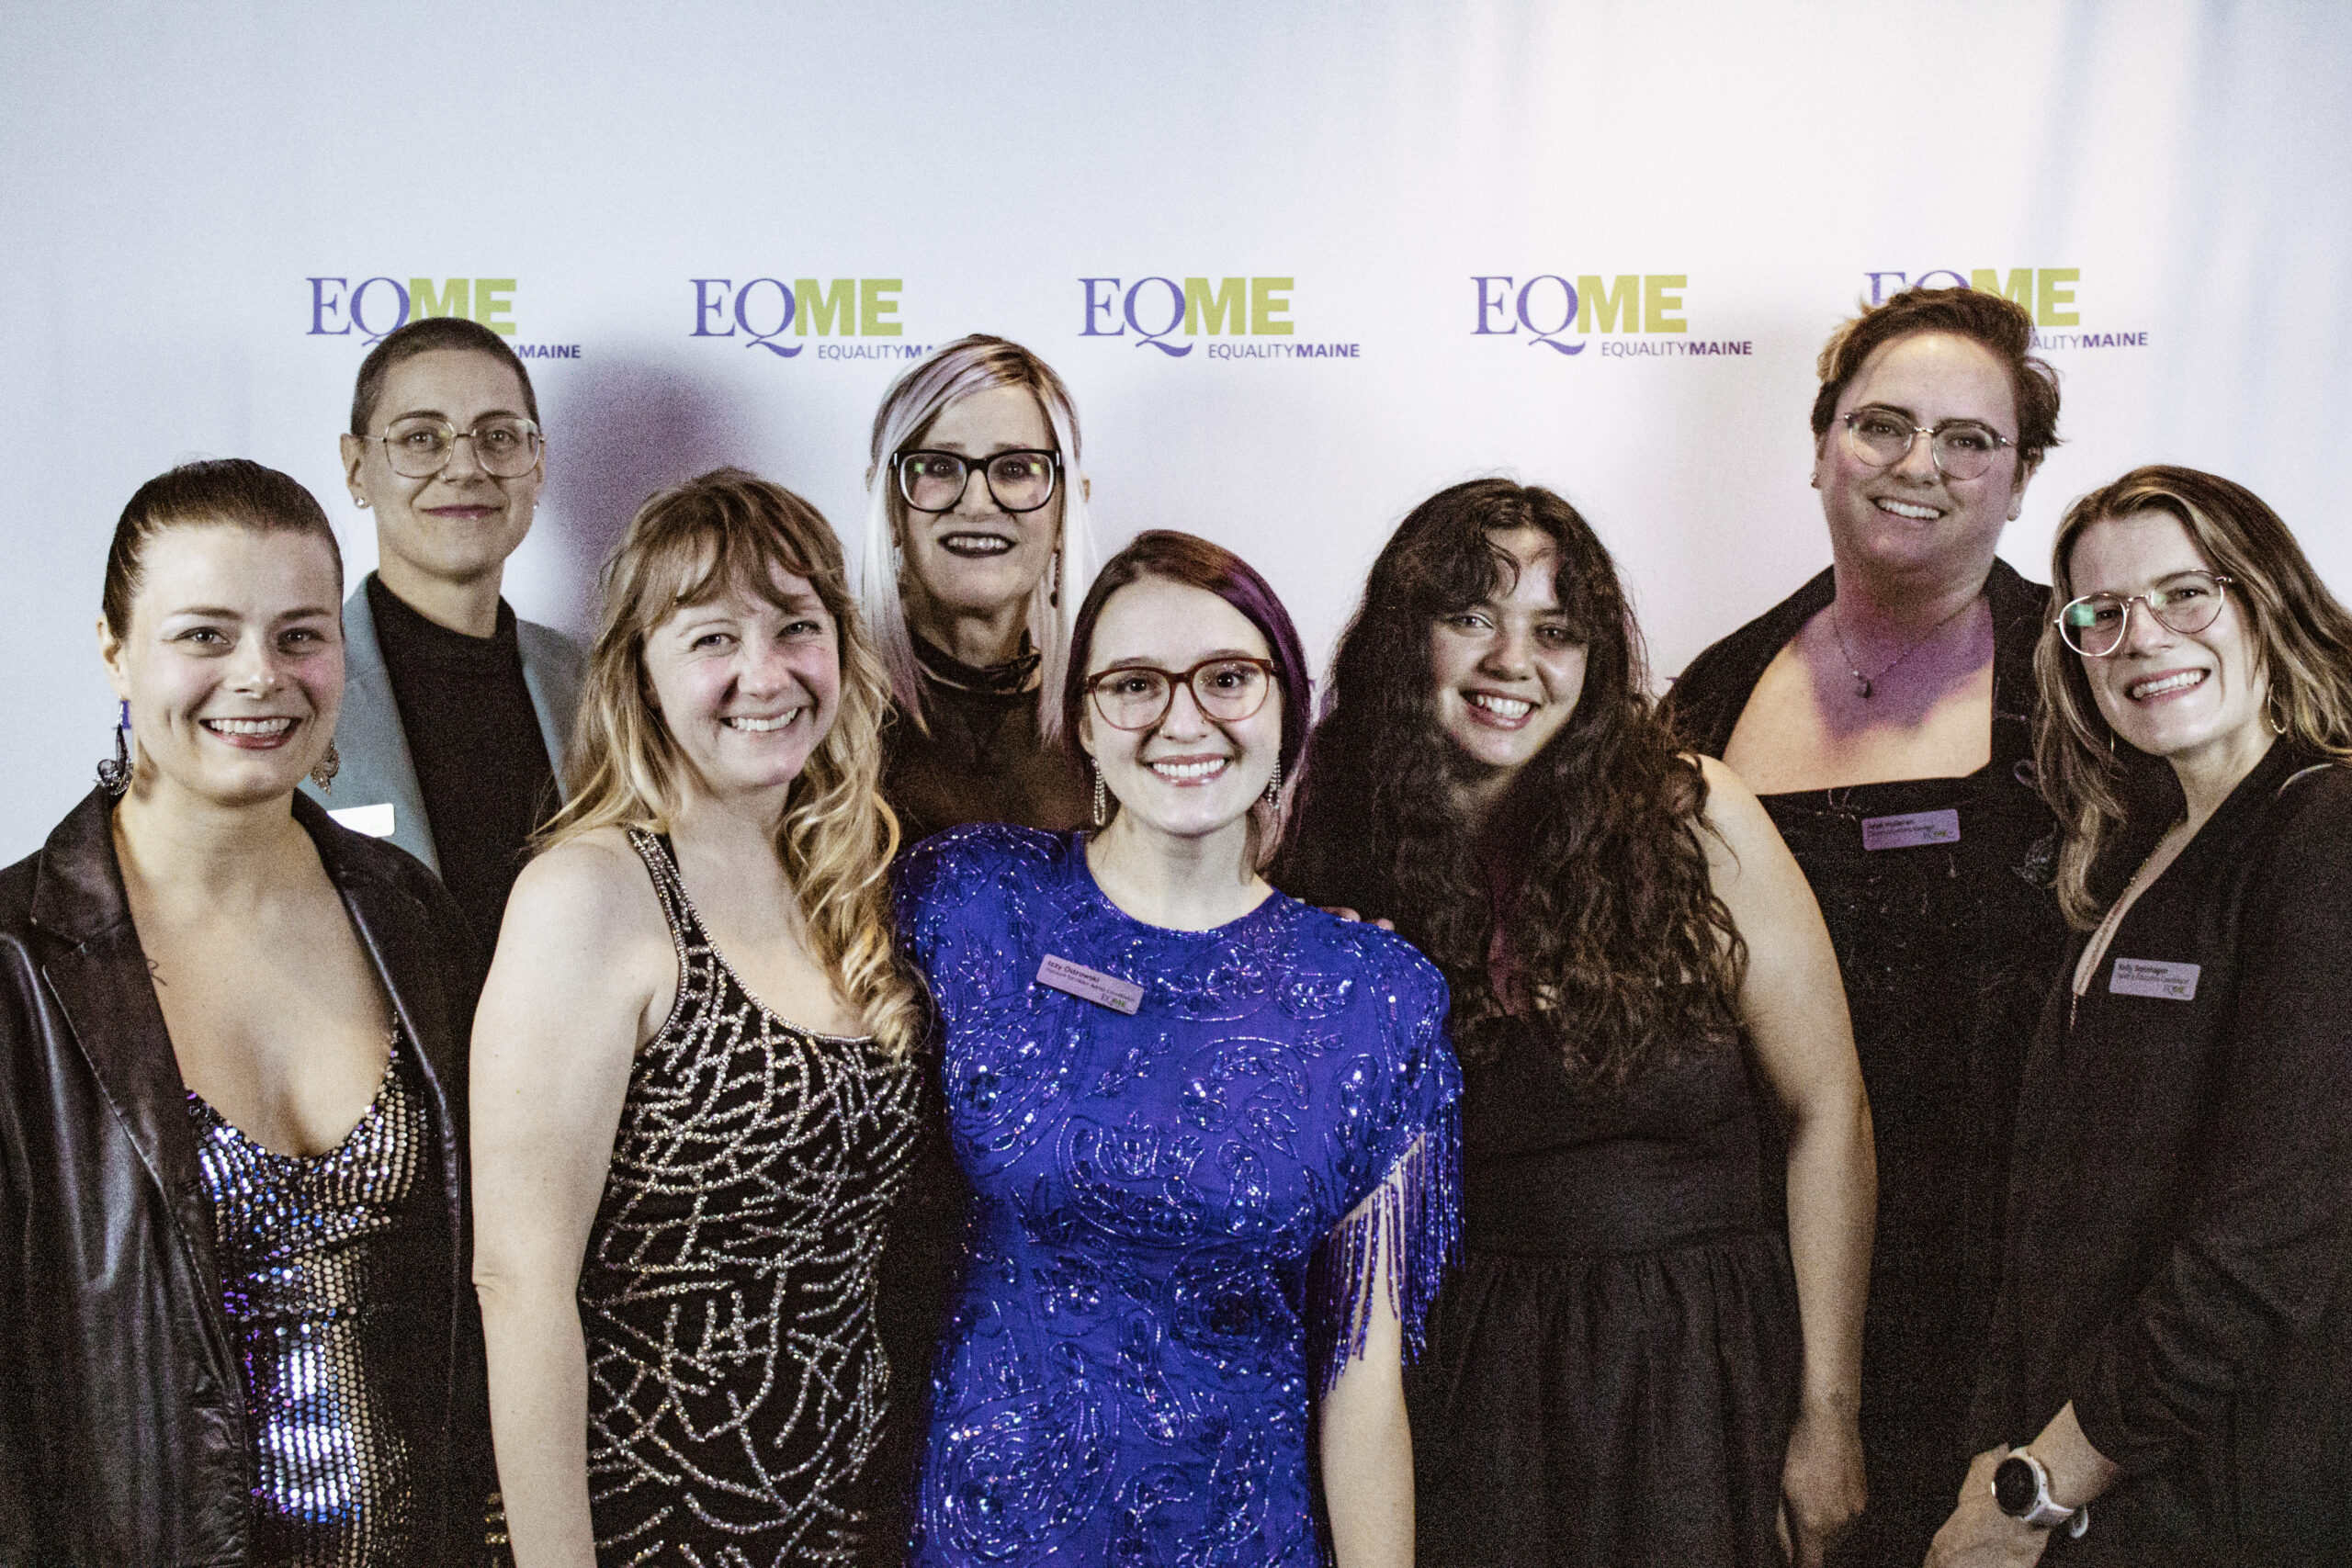 A group of eight people smiling with an Equality Maine photo backdrop behind them.